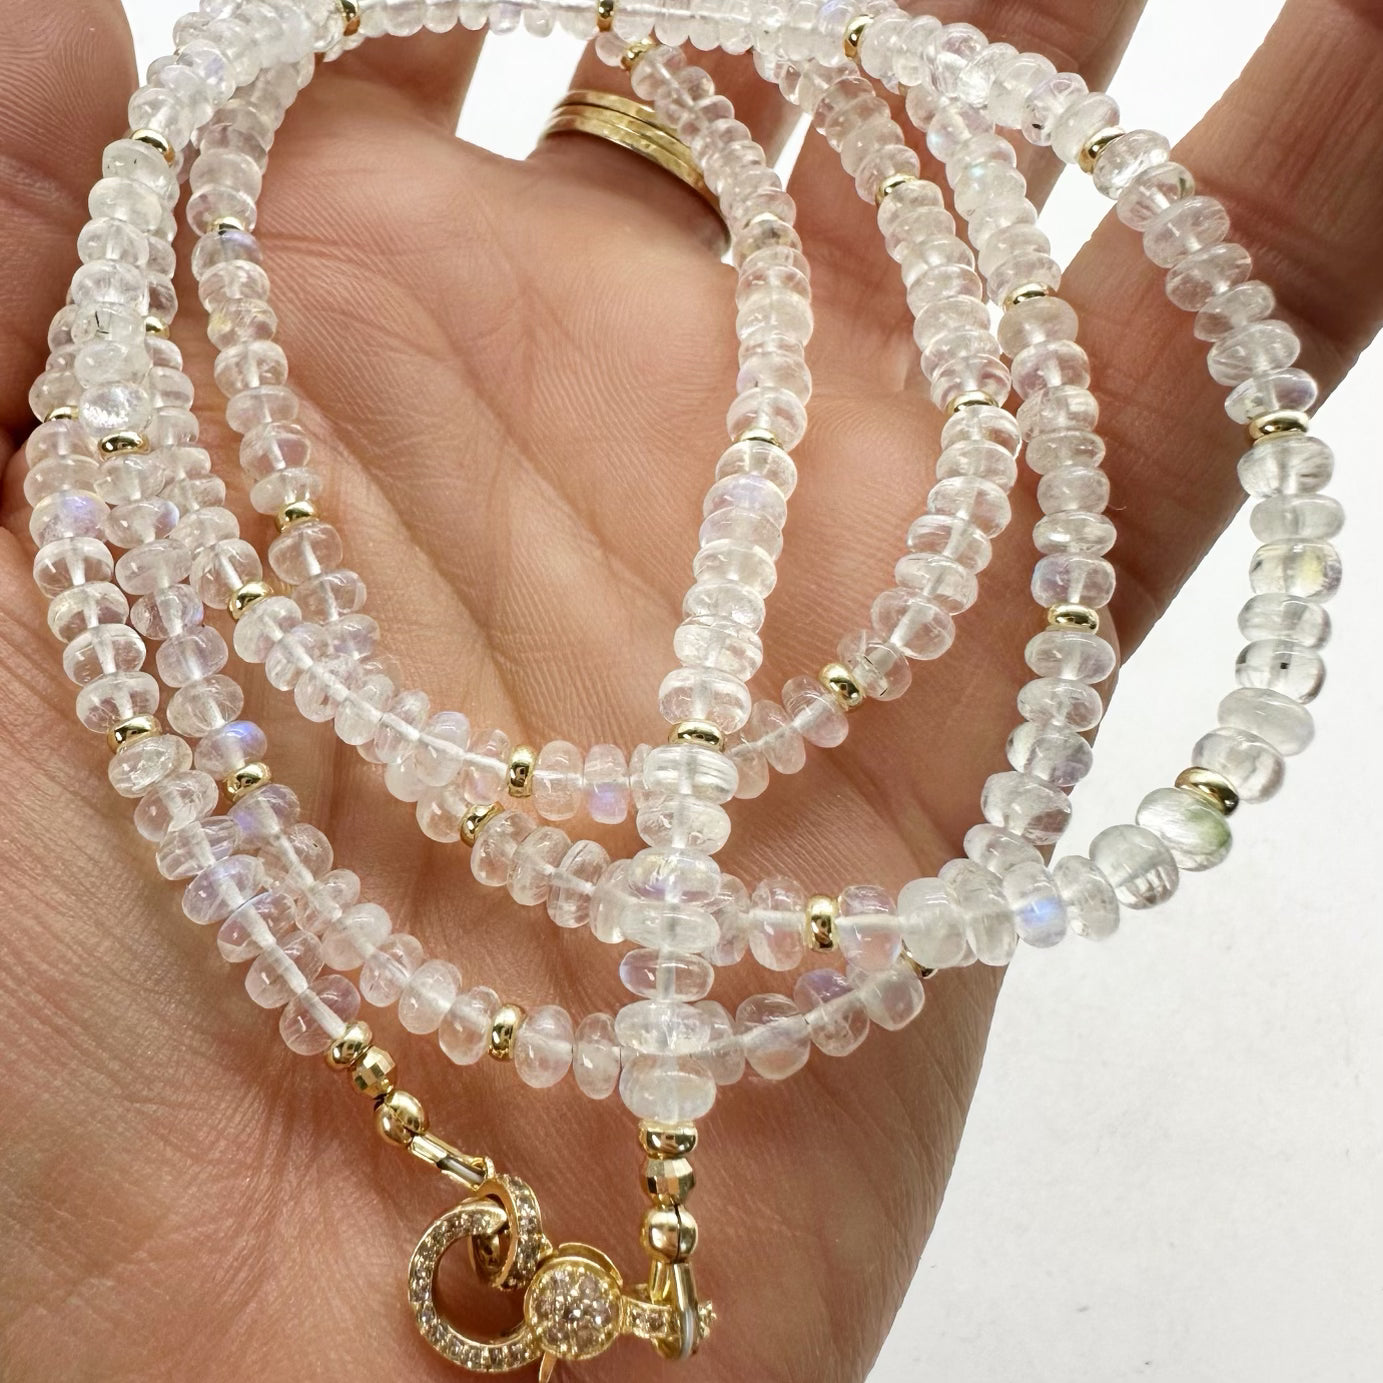 RAINBOW MOONSTONE NECKLACE WITH DIAMOND AND GOLD CLASP